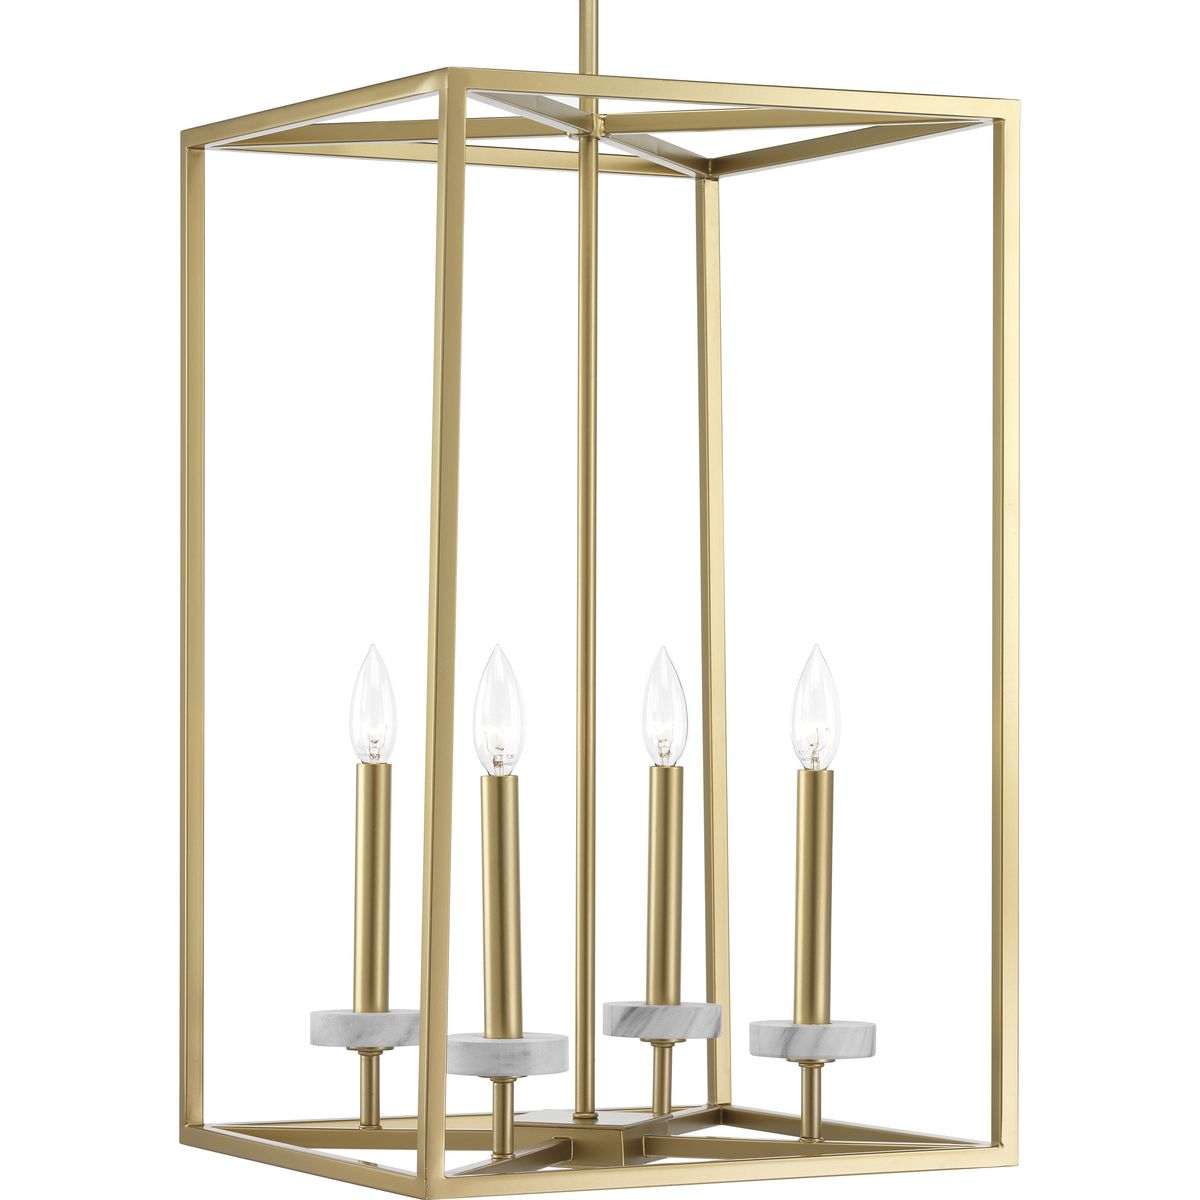 An intriguing fashion-forward lighting collection, Palacio pairs a Vintage Gold cage with faux white marble accents on the candles for a stunningly elegant design. The four-light Pendant is ideal for a variety of interiors.